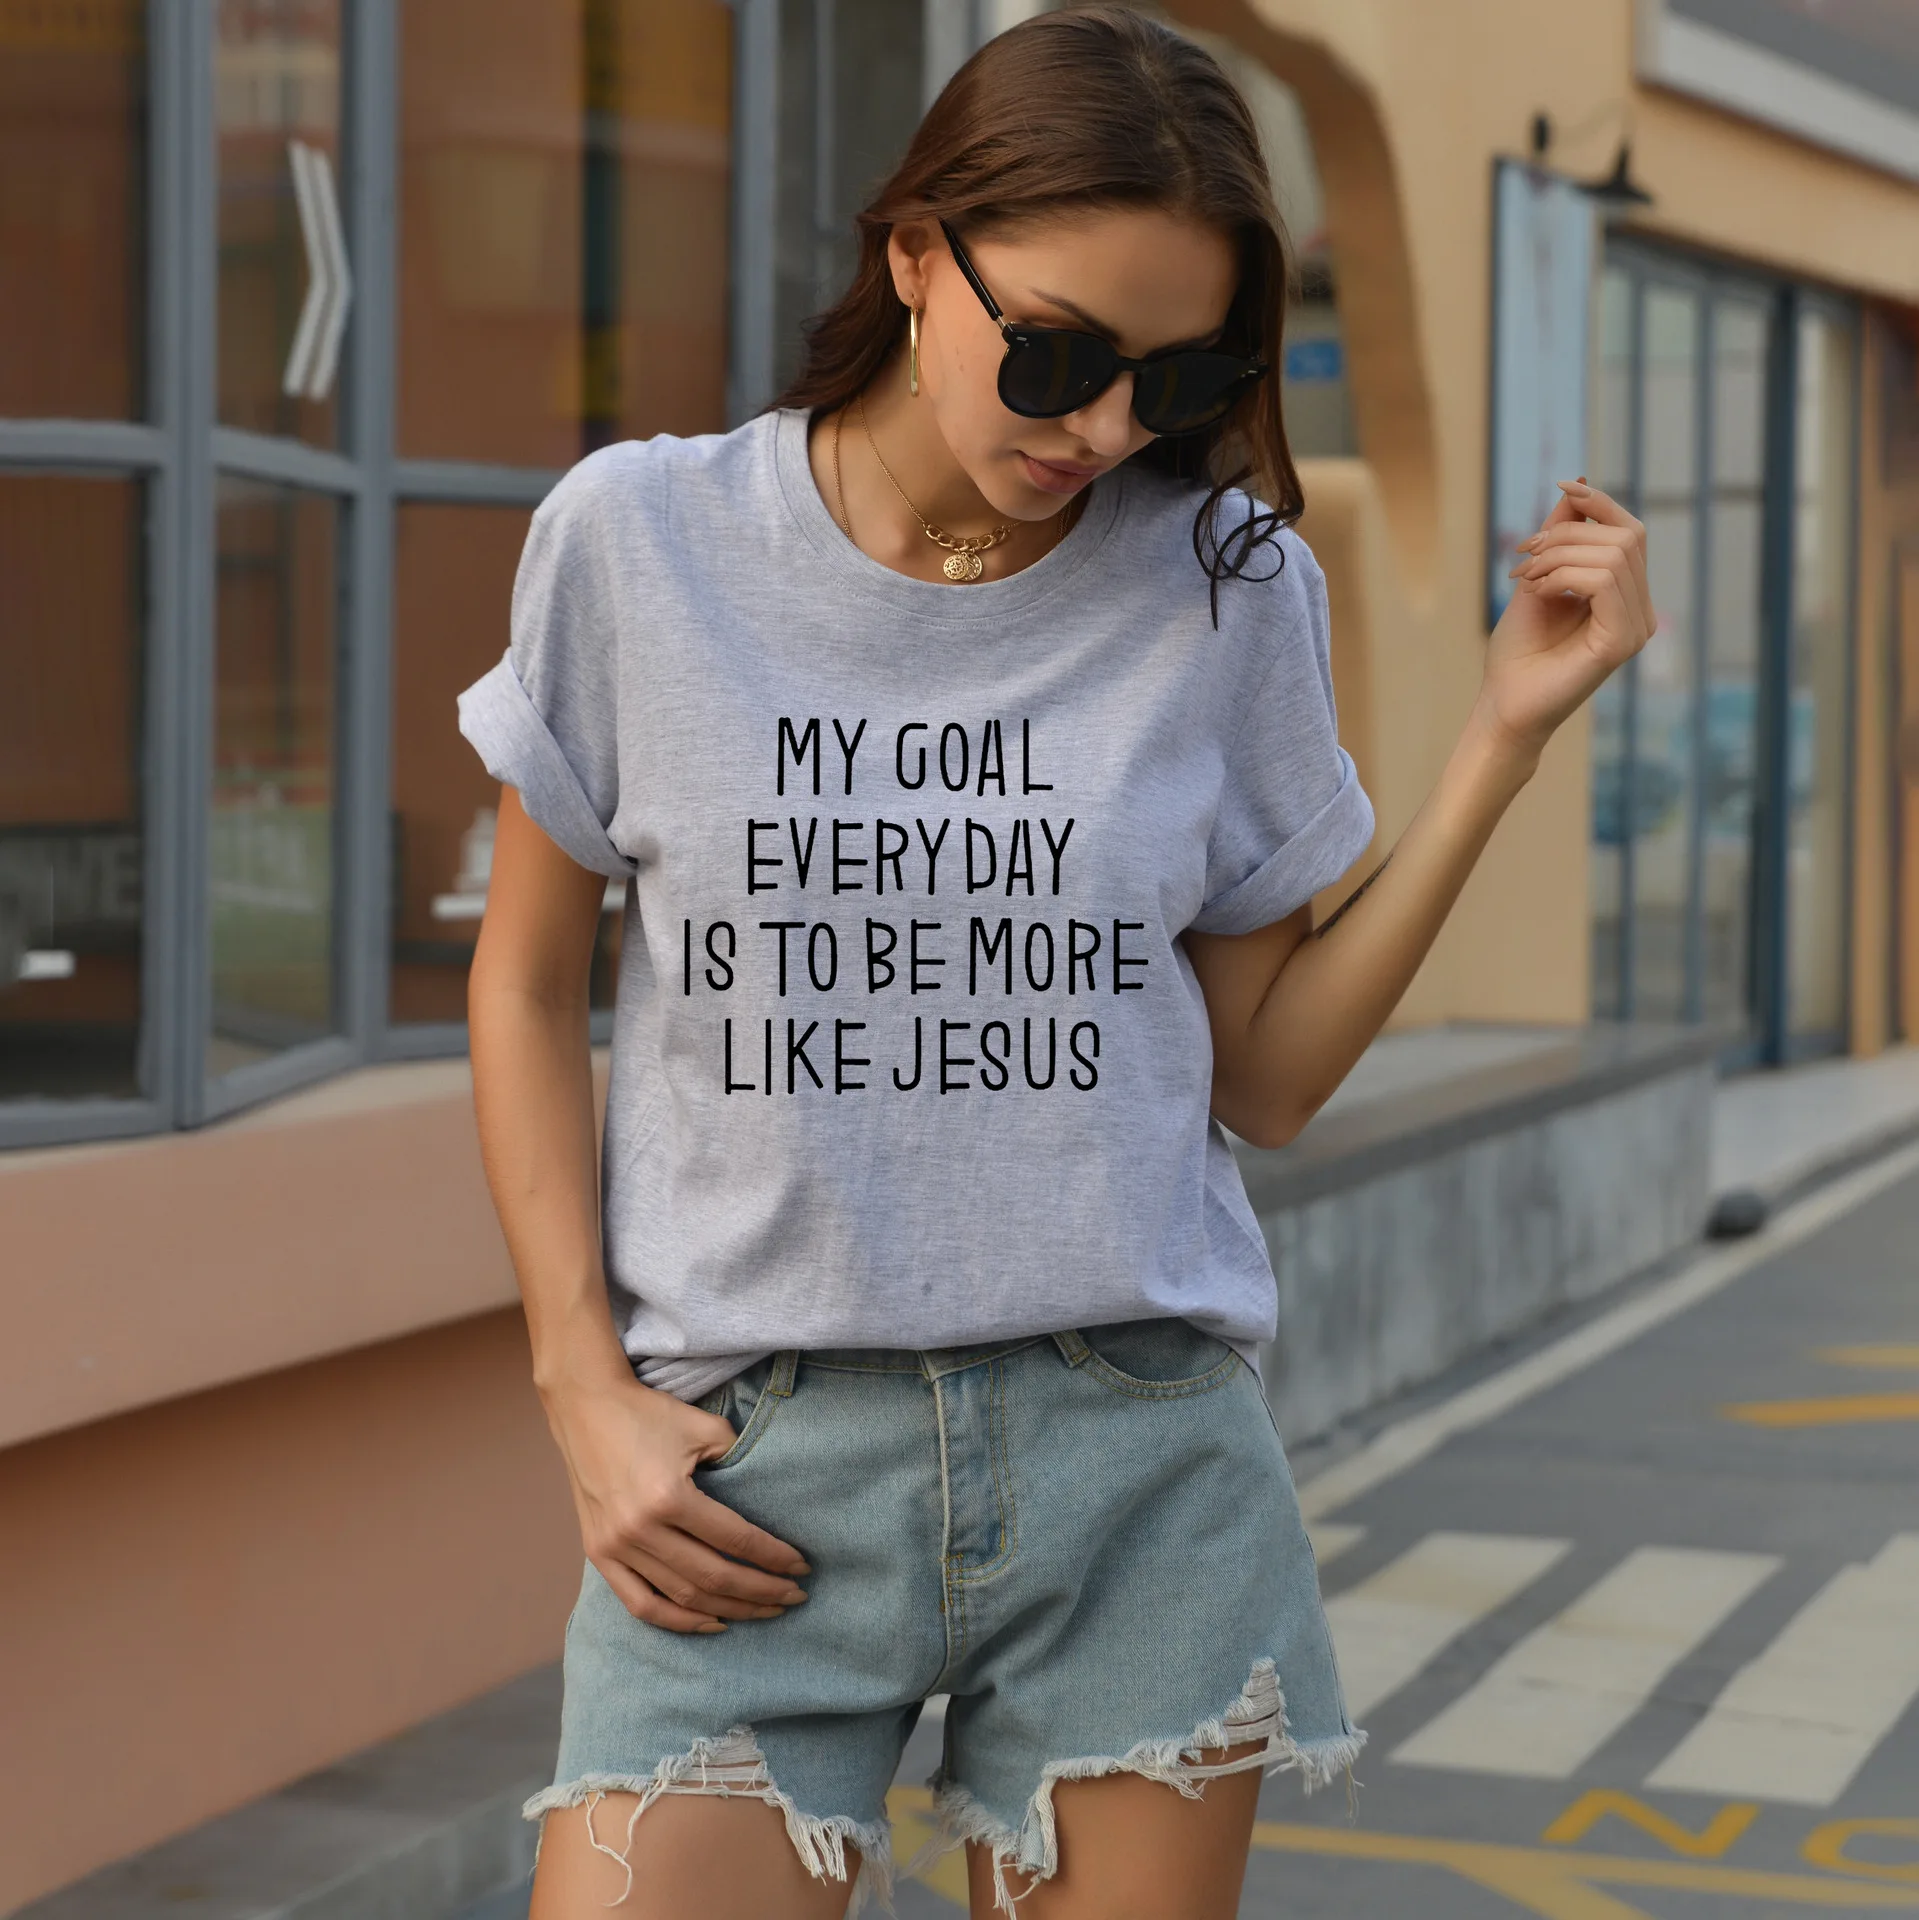 

YRYT New Women's Cotton Top LIKE JESUS Letter Printed Short-sleeved T-shirt Crewneck Casual 100 Cotton T-shirt Top